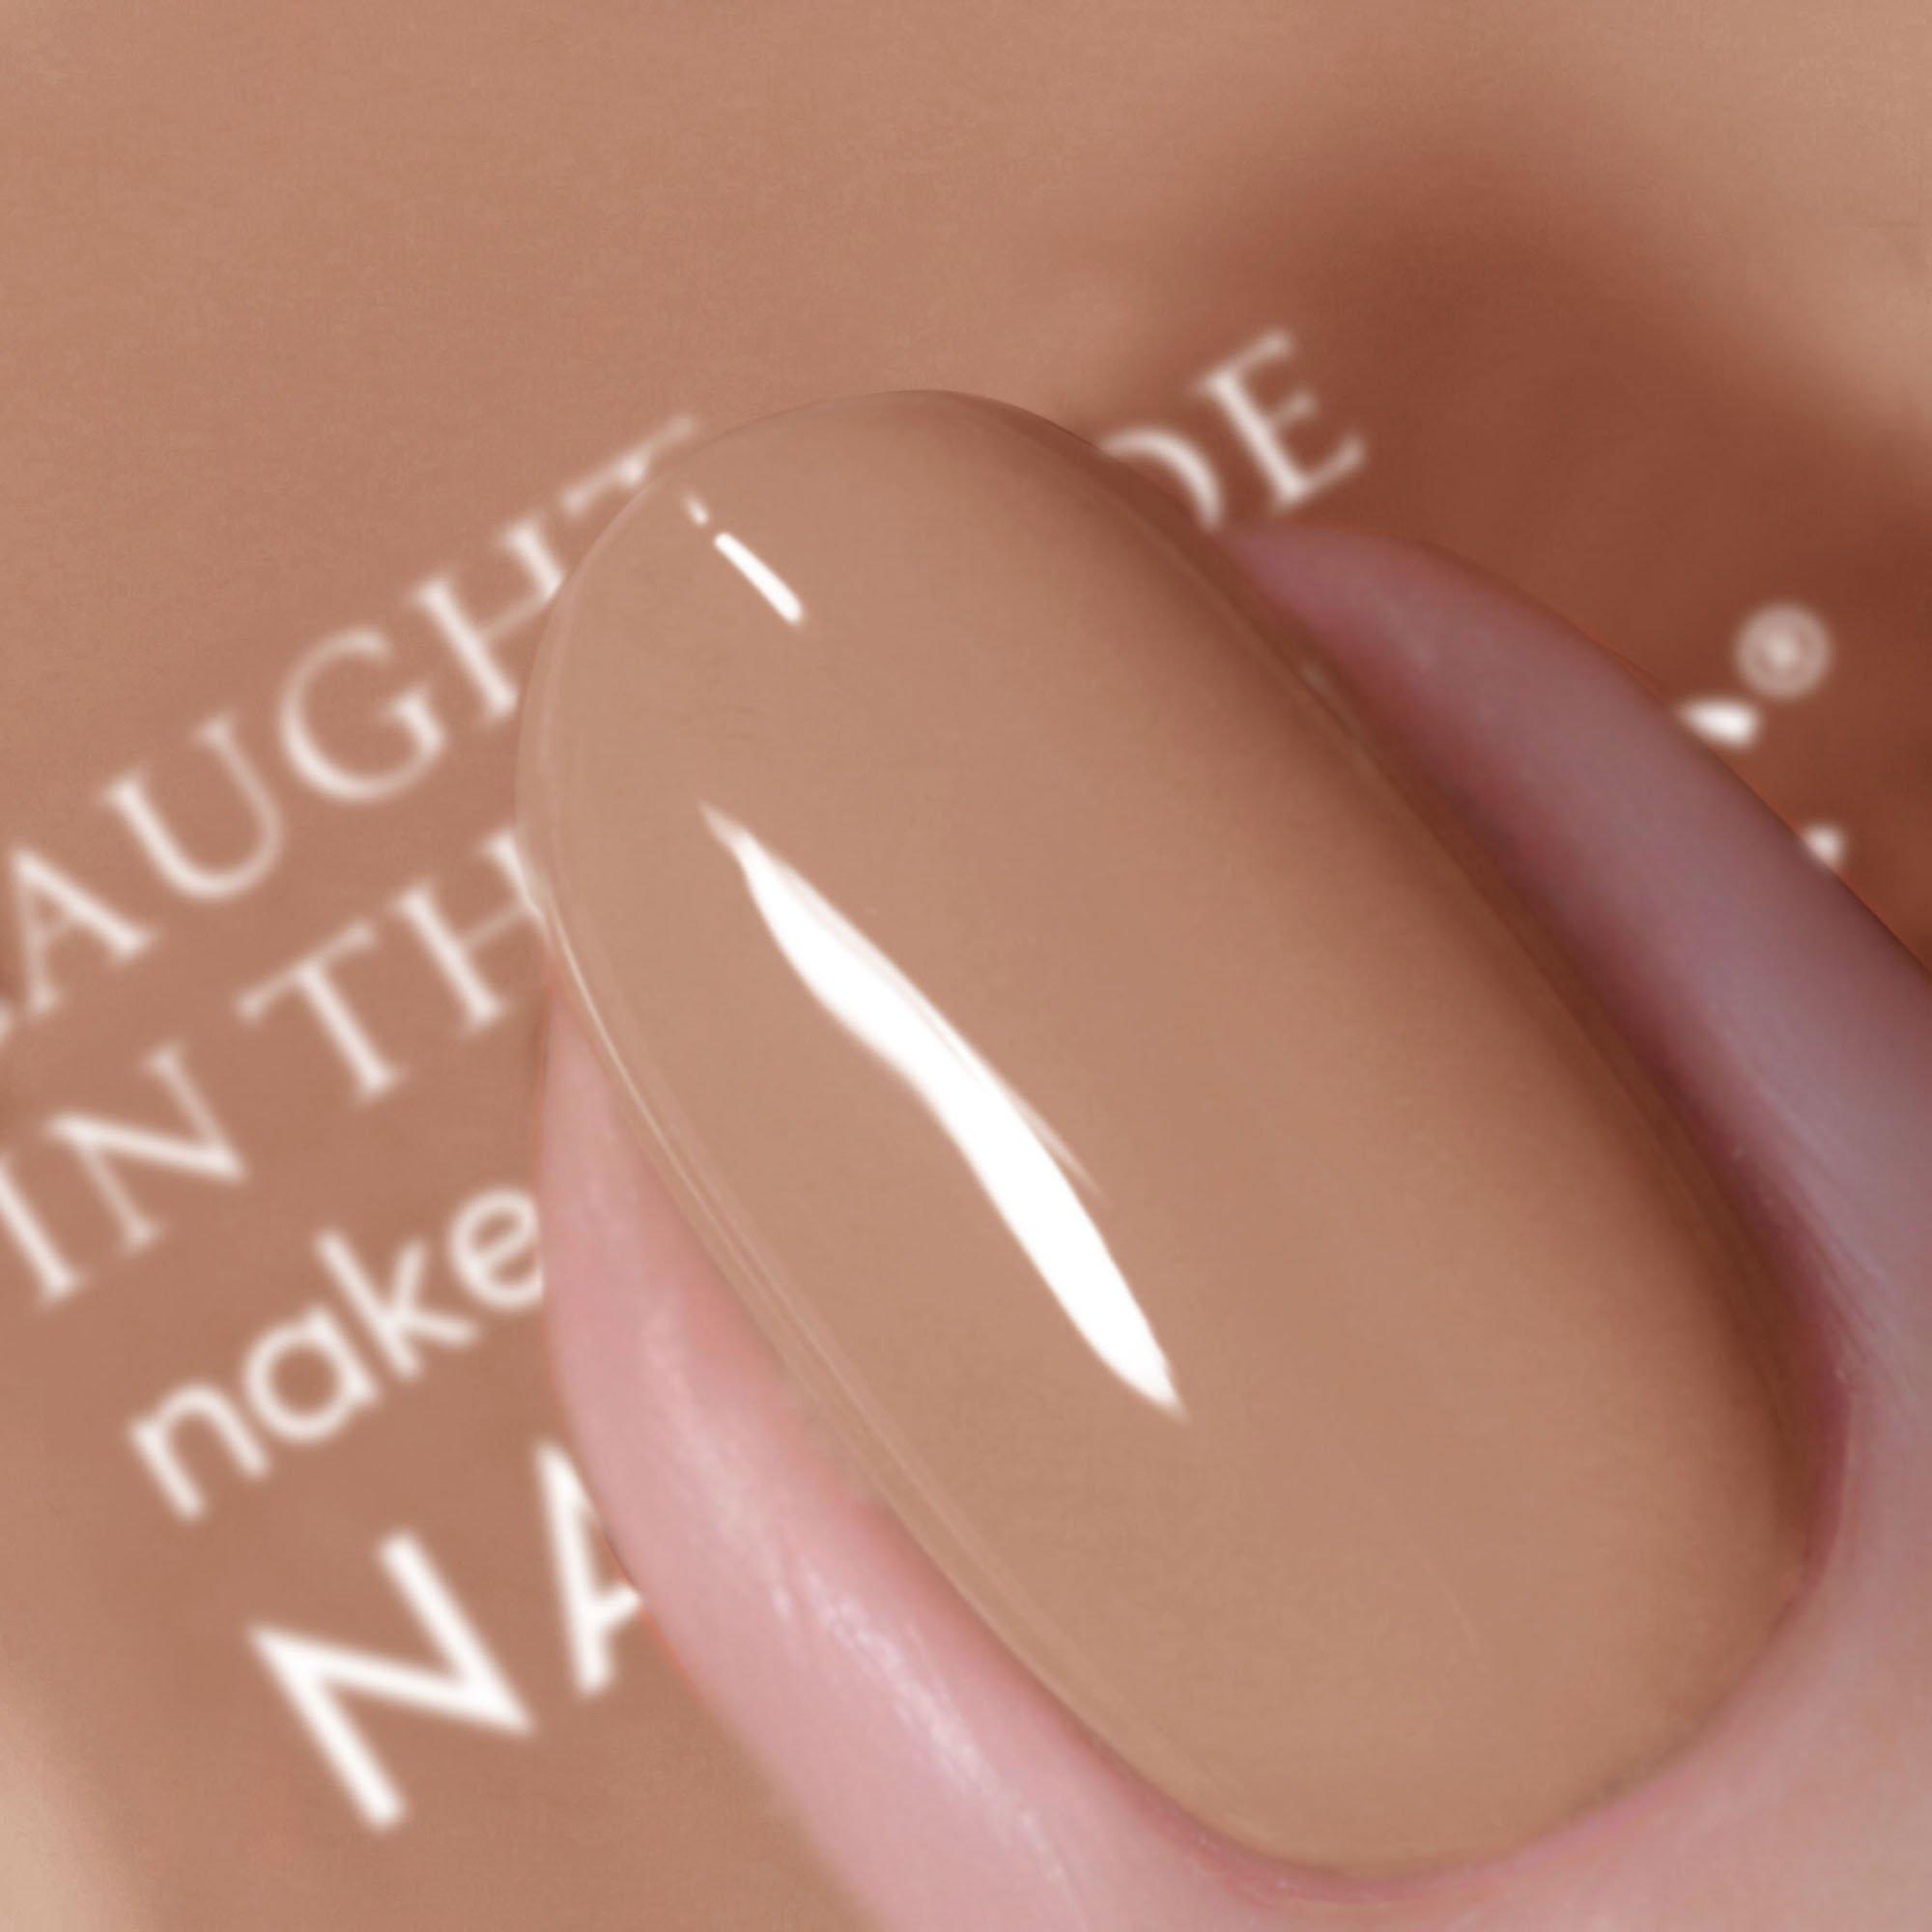 Nails Inc.  Caught In The Nude, Vernis À Ongles 